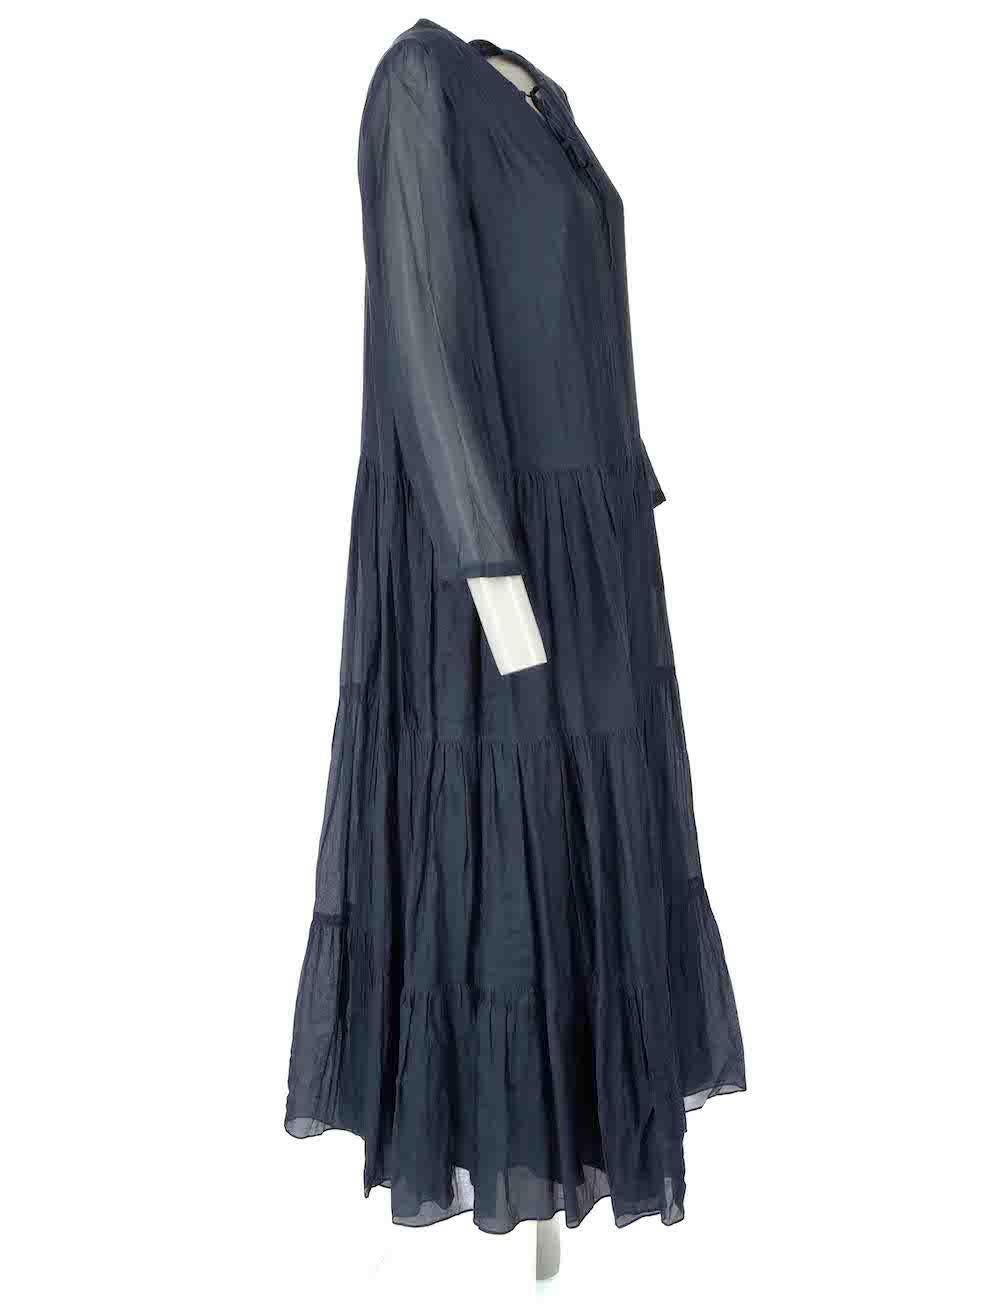 CONDITION is Very good. Hardly any visible wear to dress is evident on this used 'S Max Mara designer resale item.
 
Details
Navy
Cotton
Dress
Midi
Long sheer sleeves
Round neck
Neck tie straps
Front keyhole detail
2x Side pockets
 
Made in Romania
